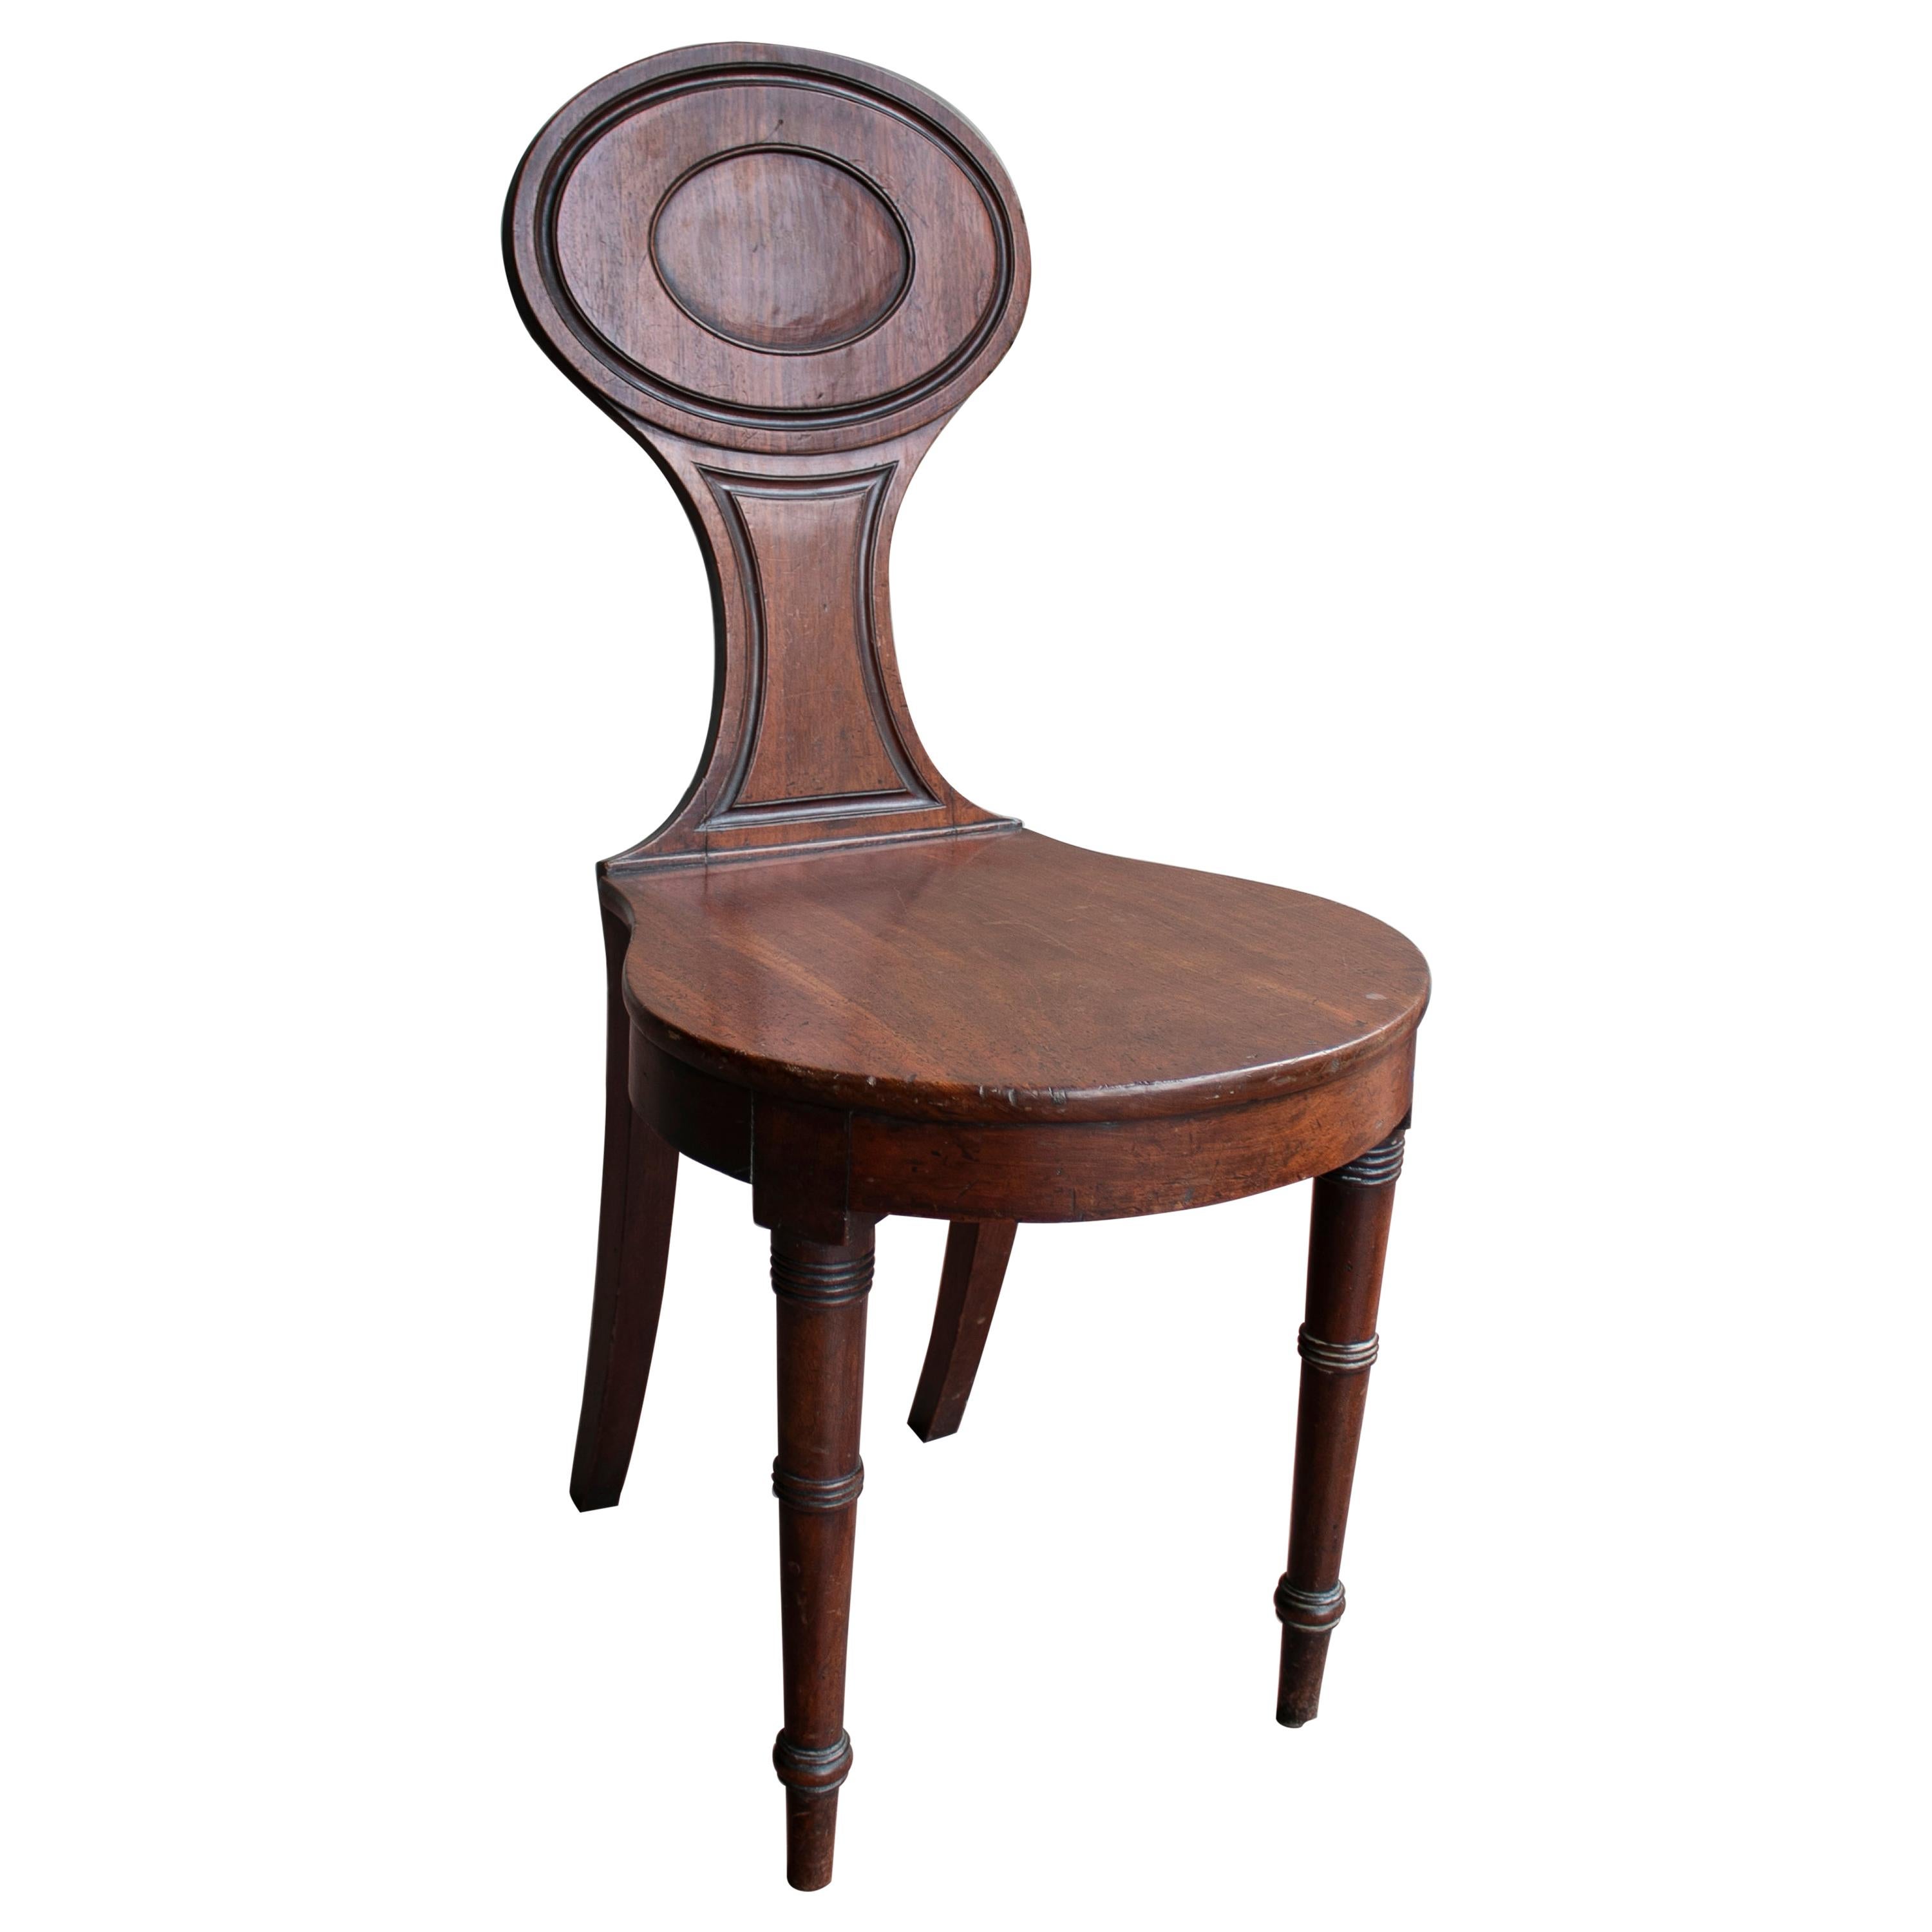 1920s English Smokers Wooden Chair